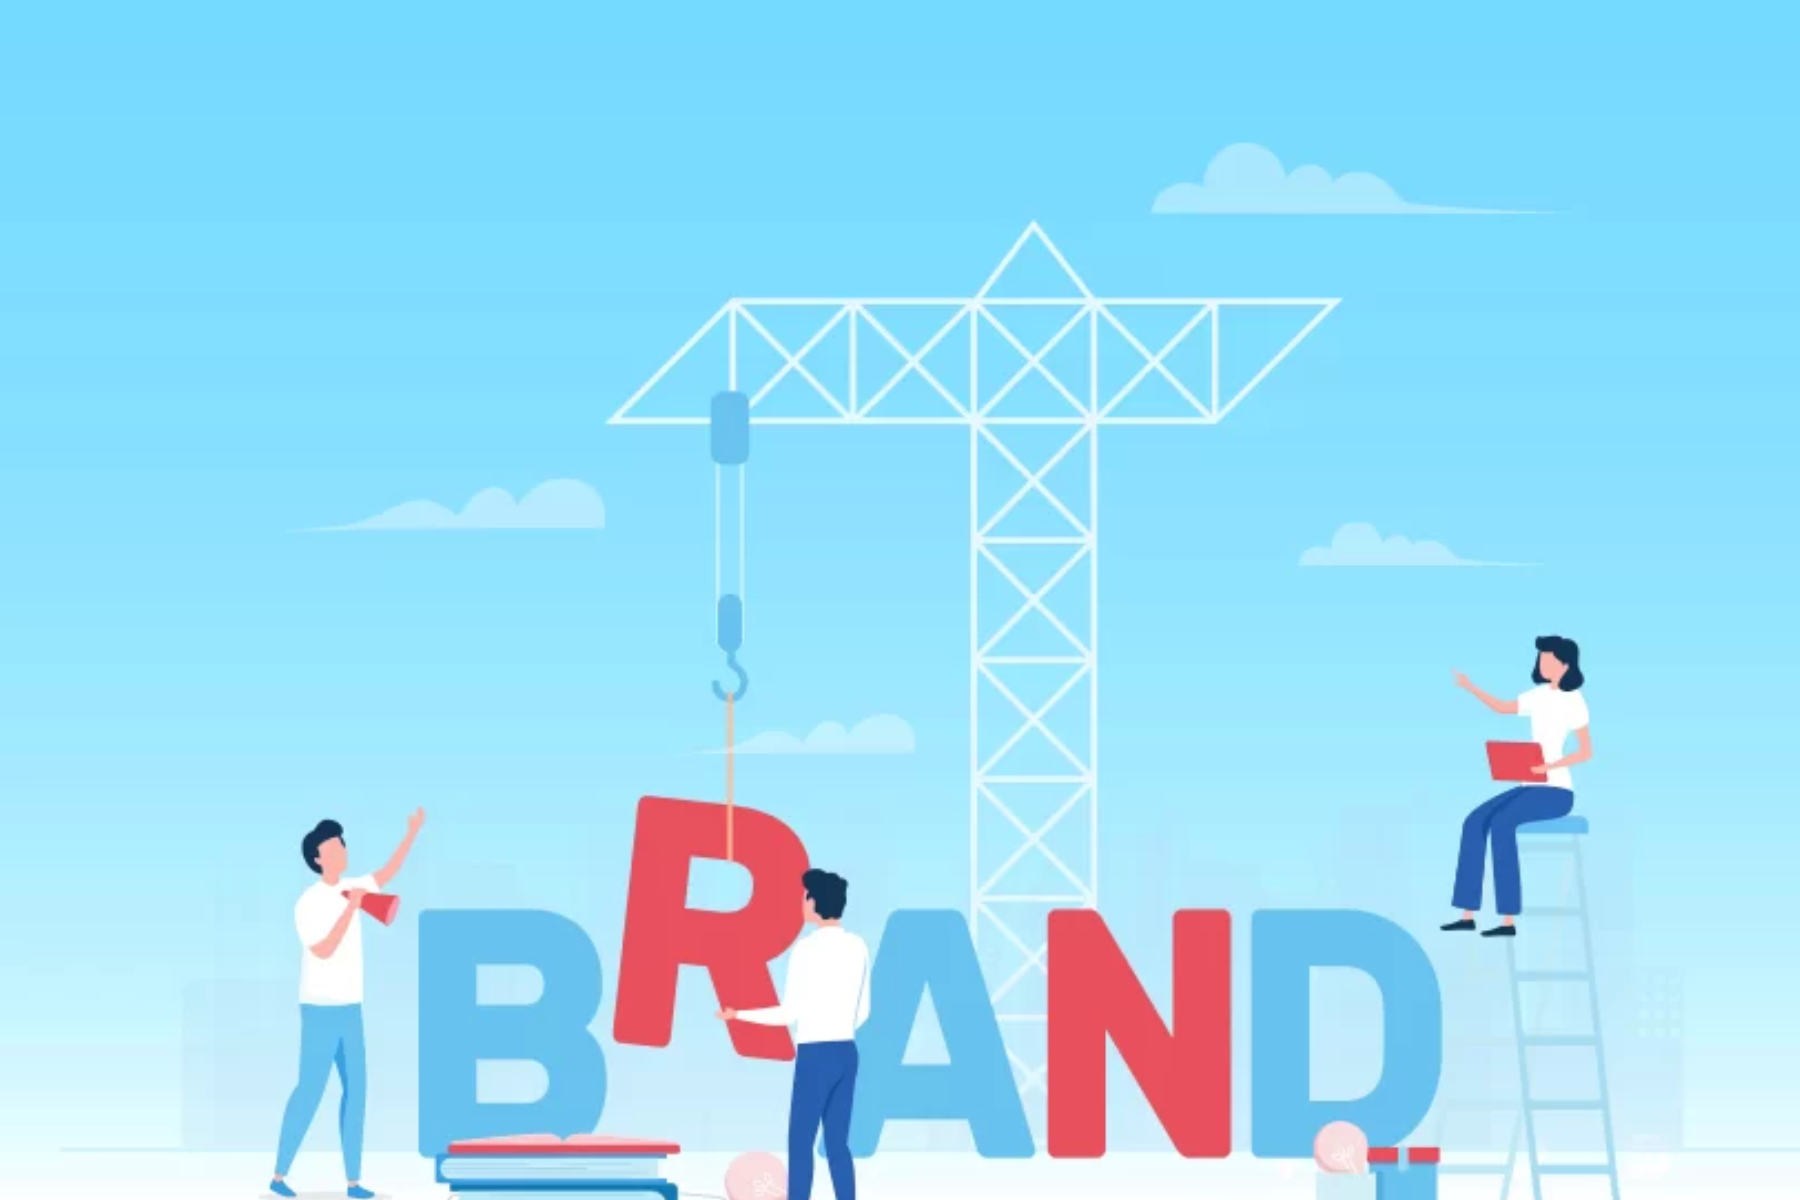 A group of people constructing the word "BRAND"